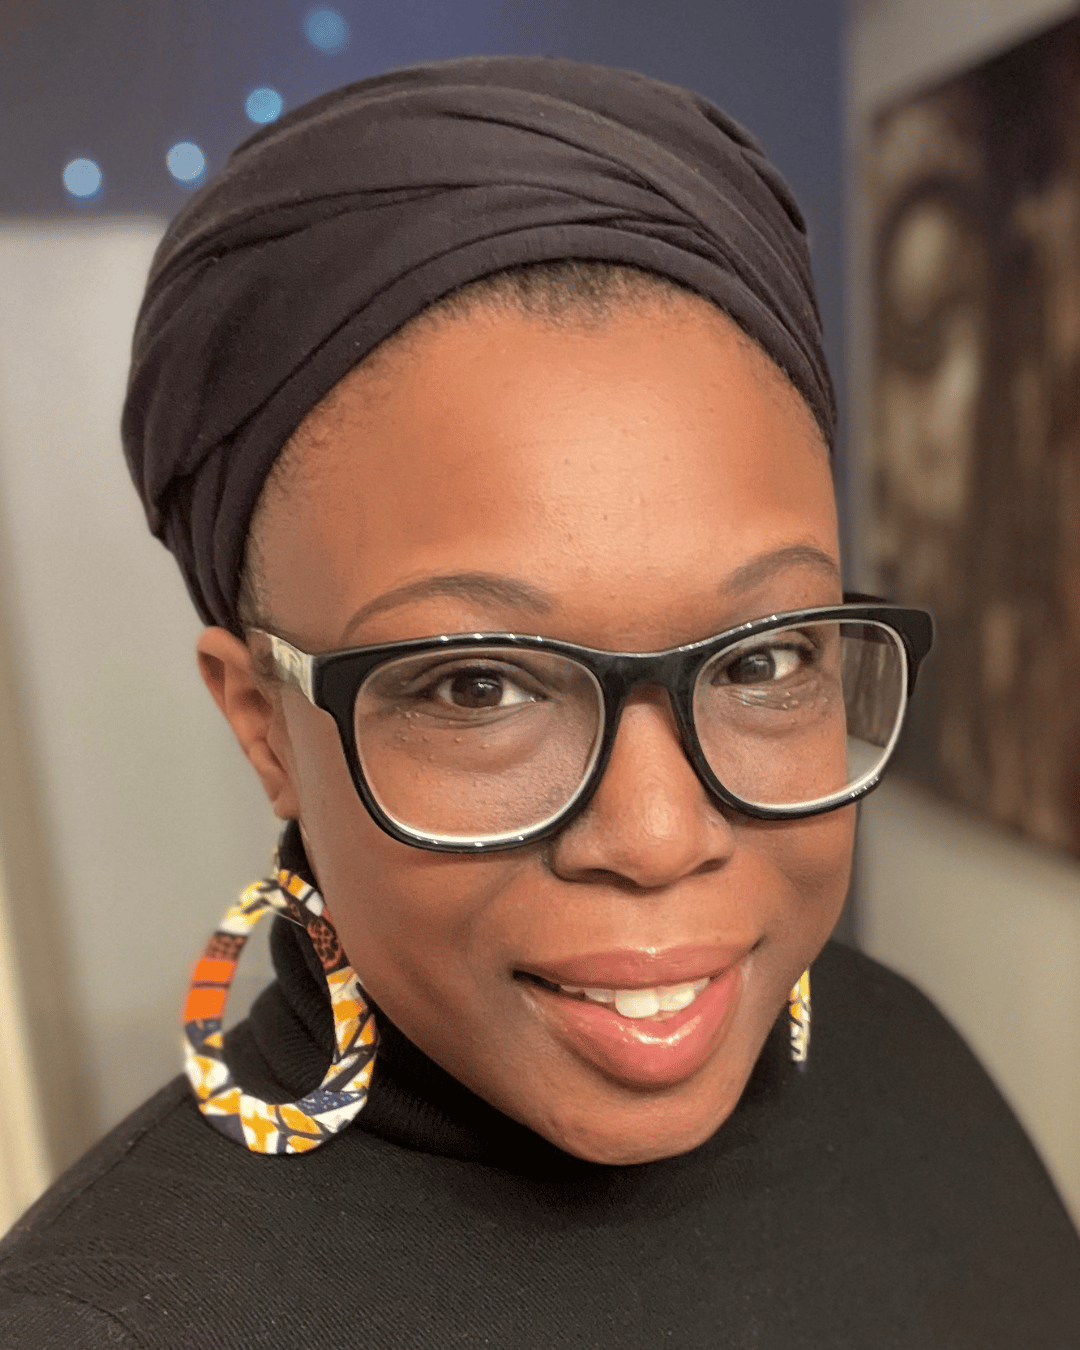 Headshot photo of Shahneka Dupart, ACSW a therapist in San Francisco, California. Shahneka is a Black woman wearing glasses, large colorful earrings, and a black head wrap.